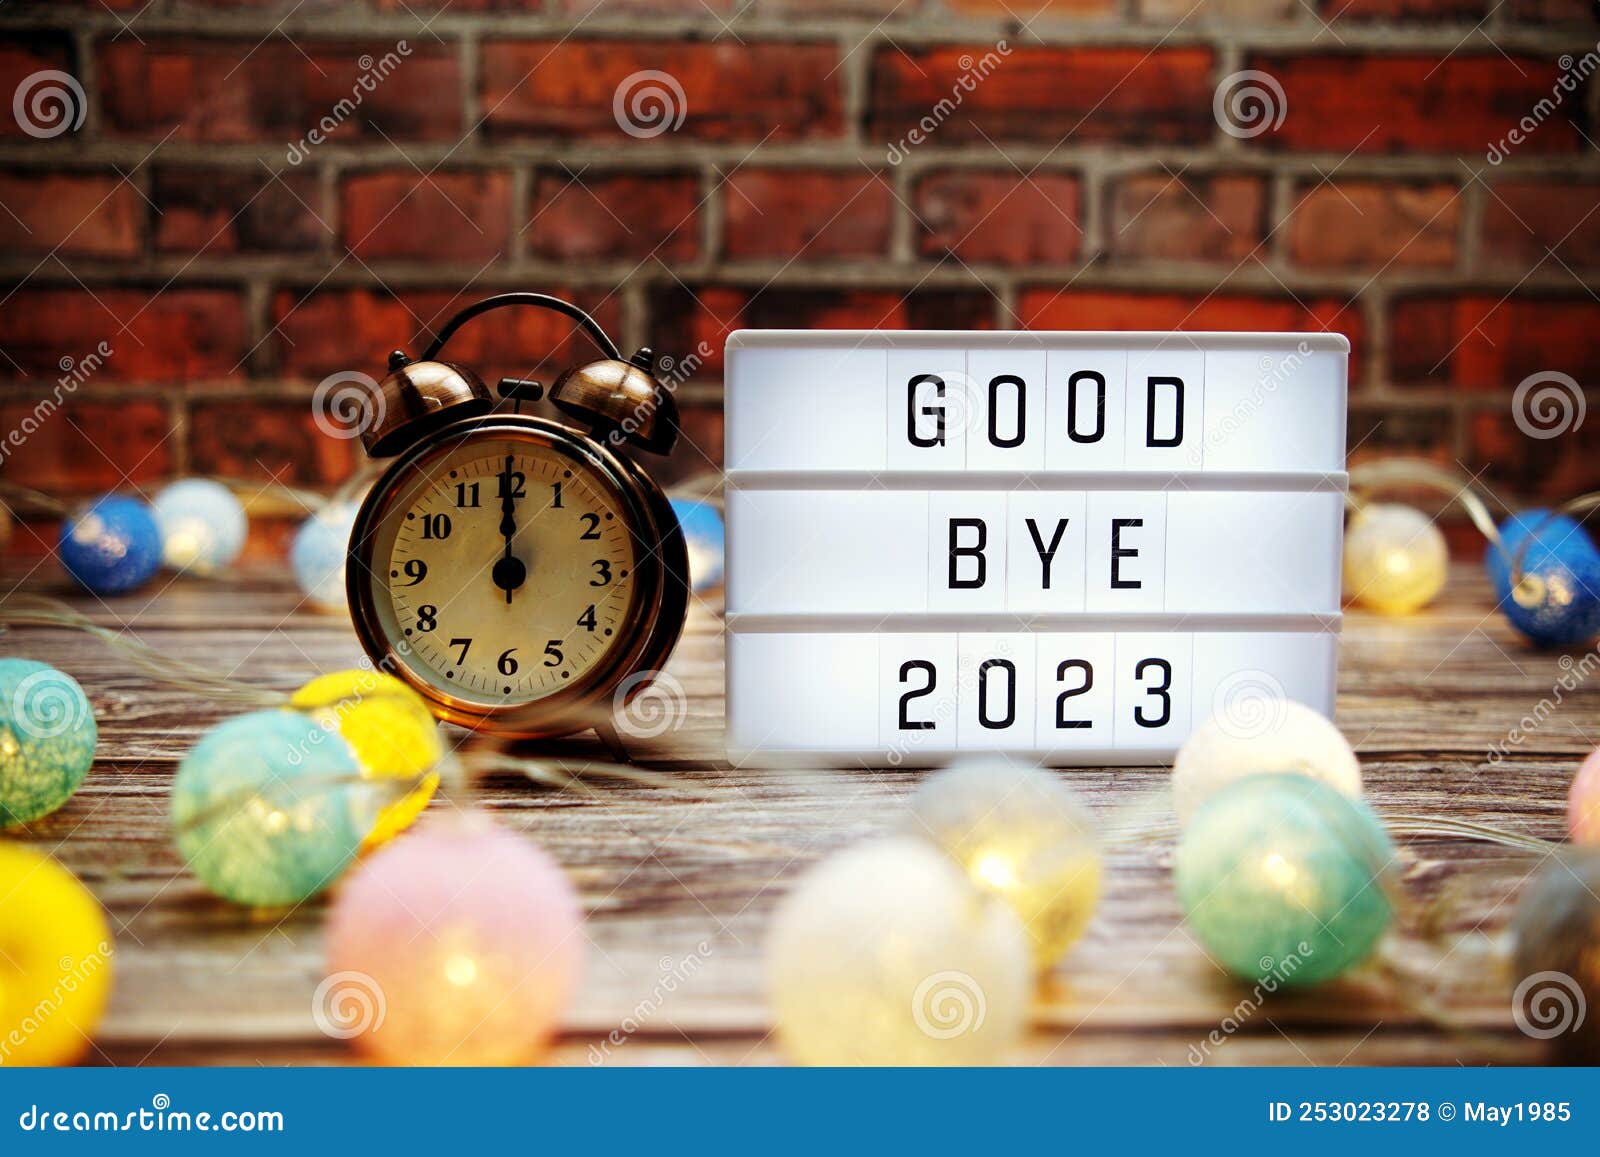 goodbye 2023 text in light box with alarm clock and led cotton balls decoration